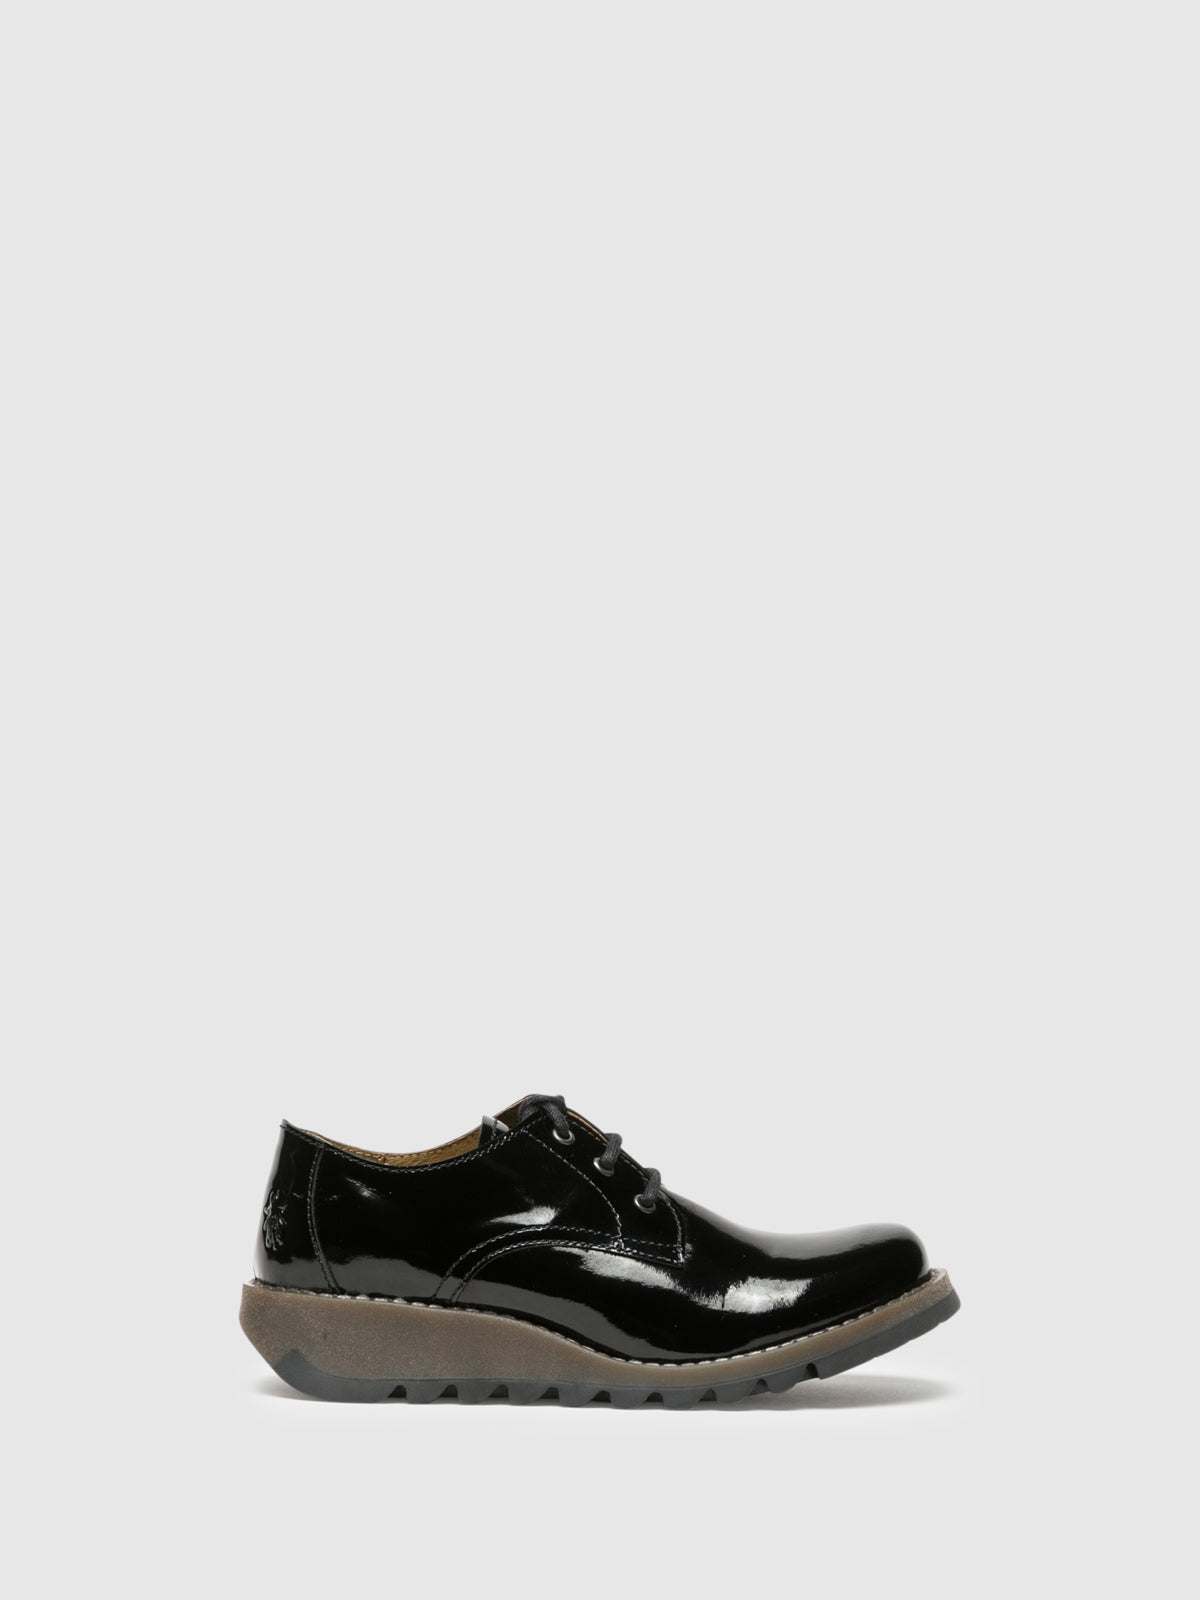 Fly London Derby Shoes SIMB389FLY Black